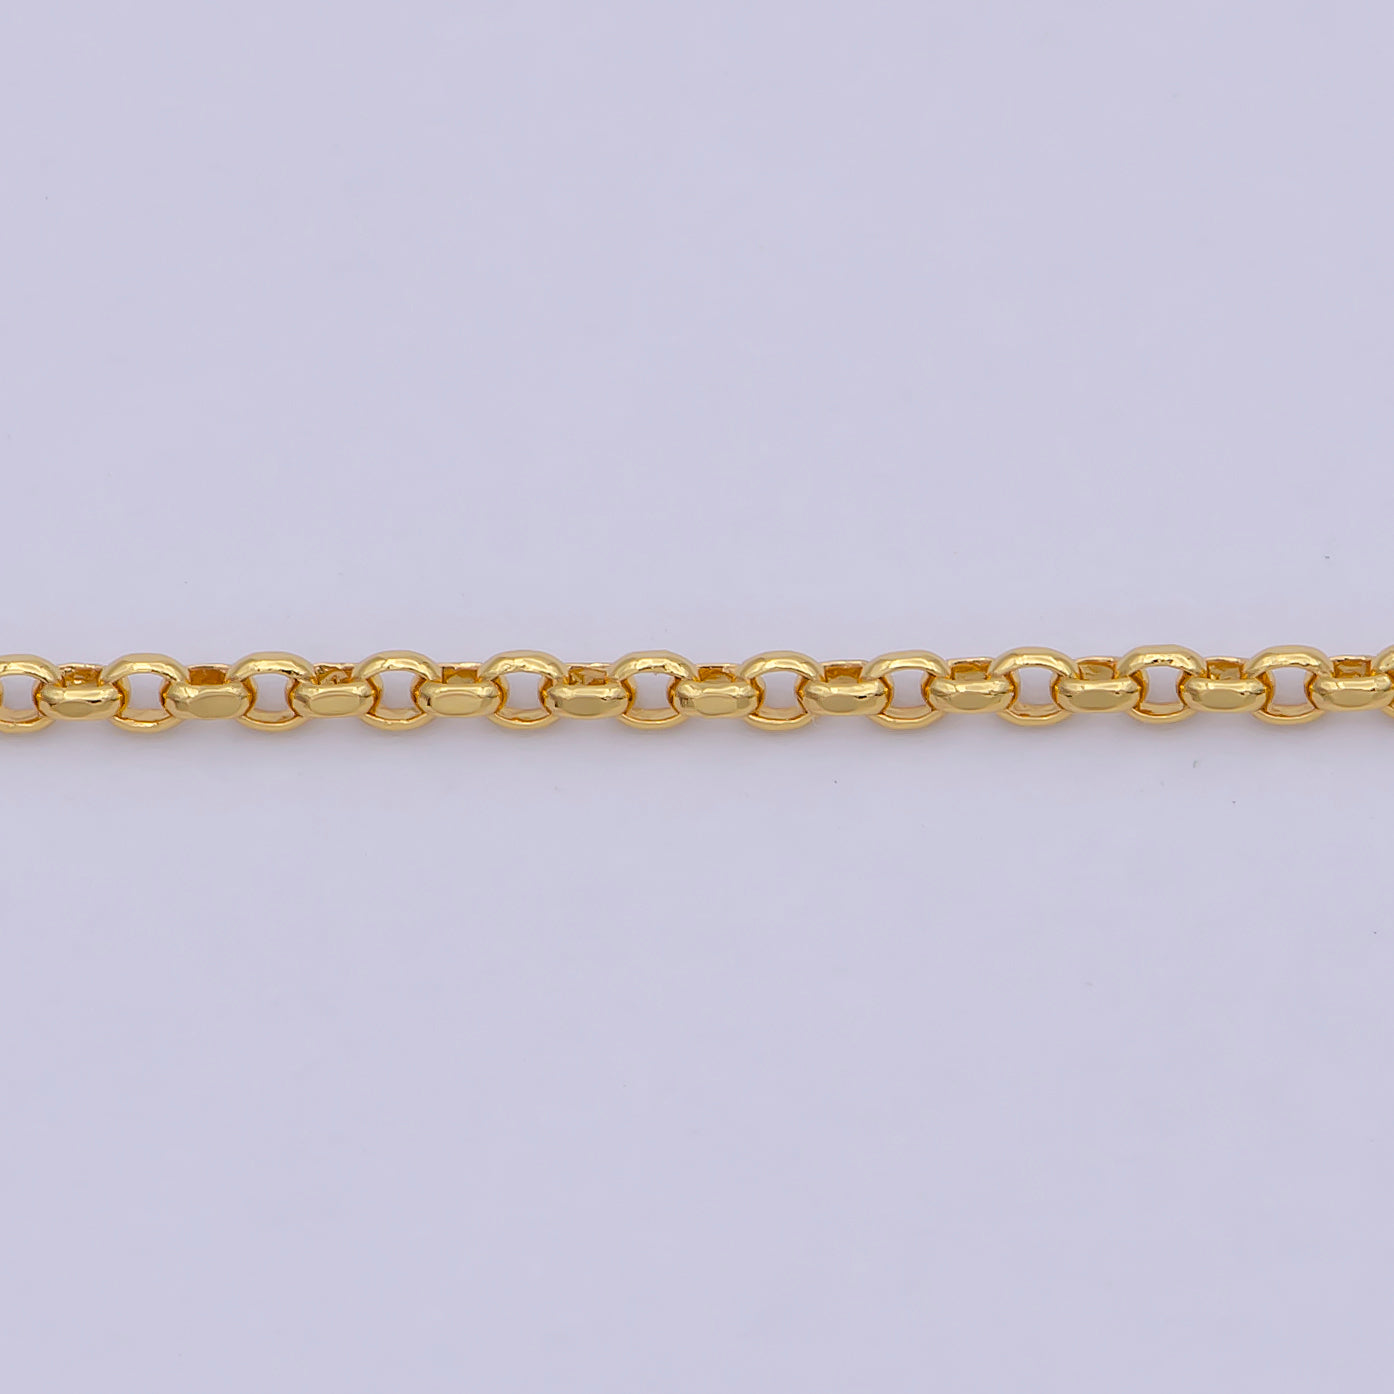 1.3mm 24K Gold Filled Chain, Rolo Chain Dainty Gold Necklace Chain, Circle Cable Chain Wholesale WA-747 - DLUXCA